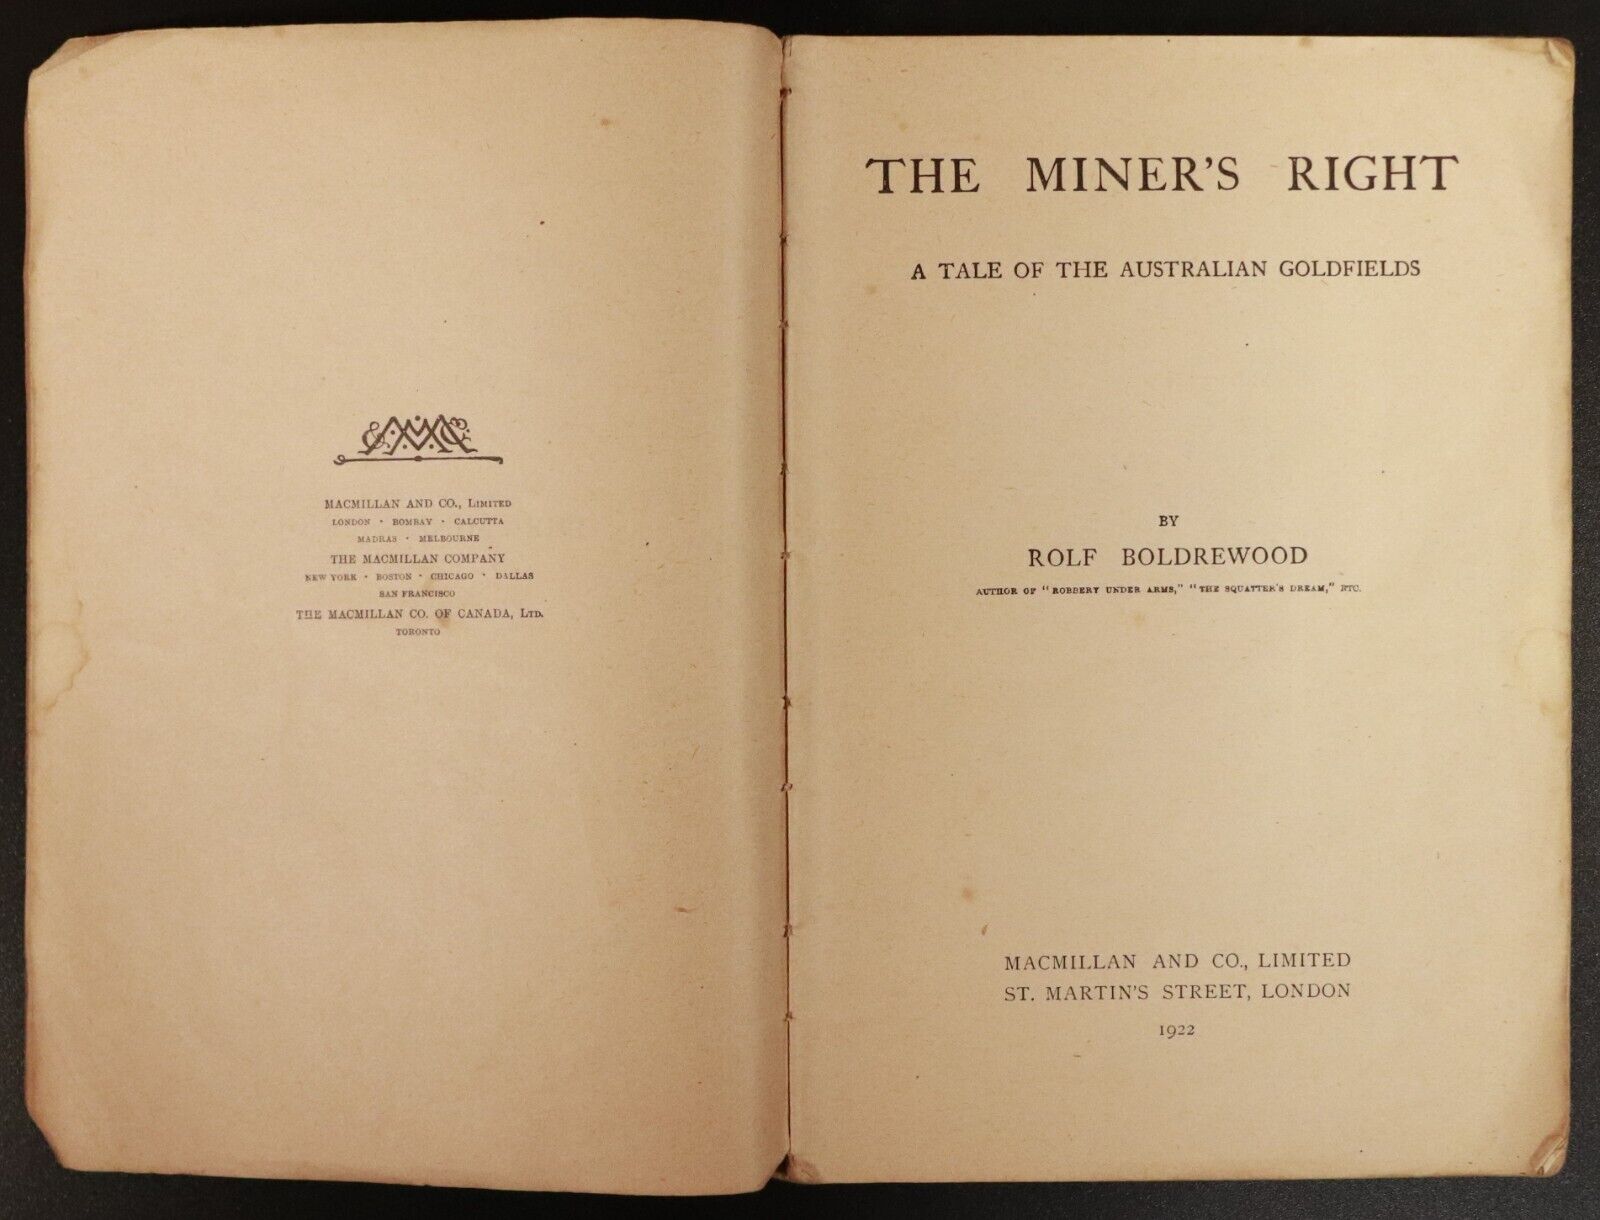 1922 The Miner's Right by Rolf Boldrewood Antique Australian Goldfields Book